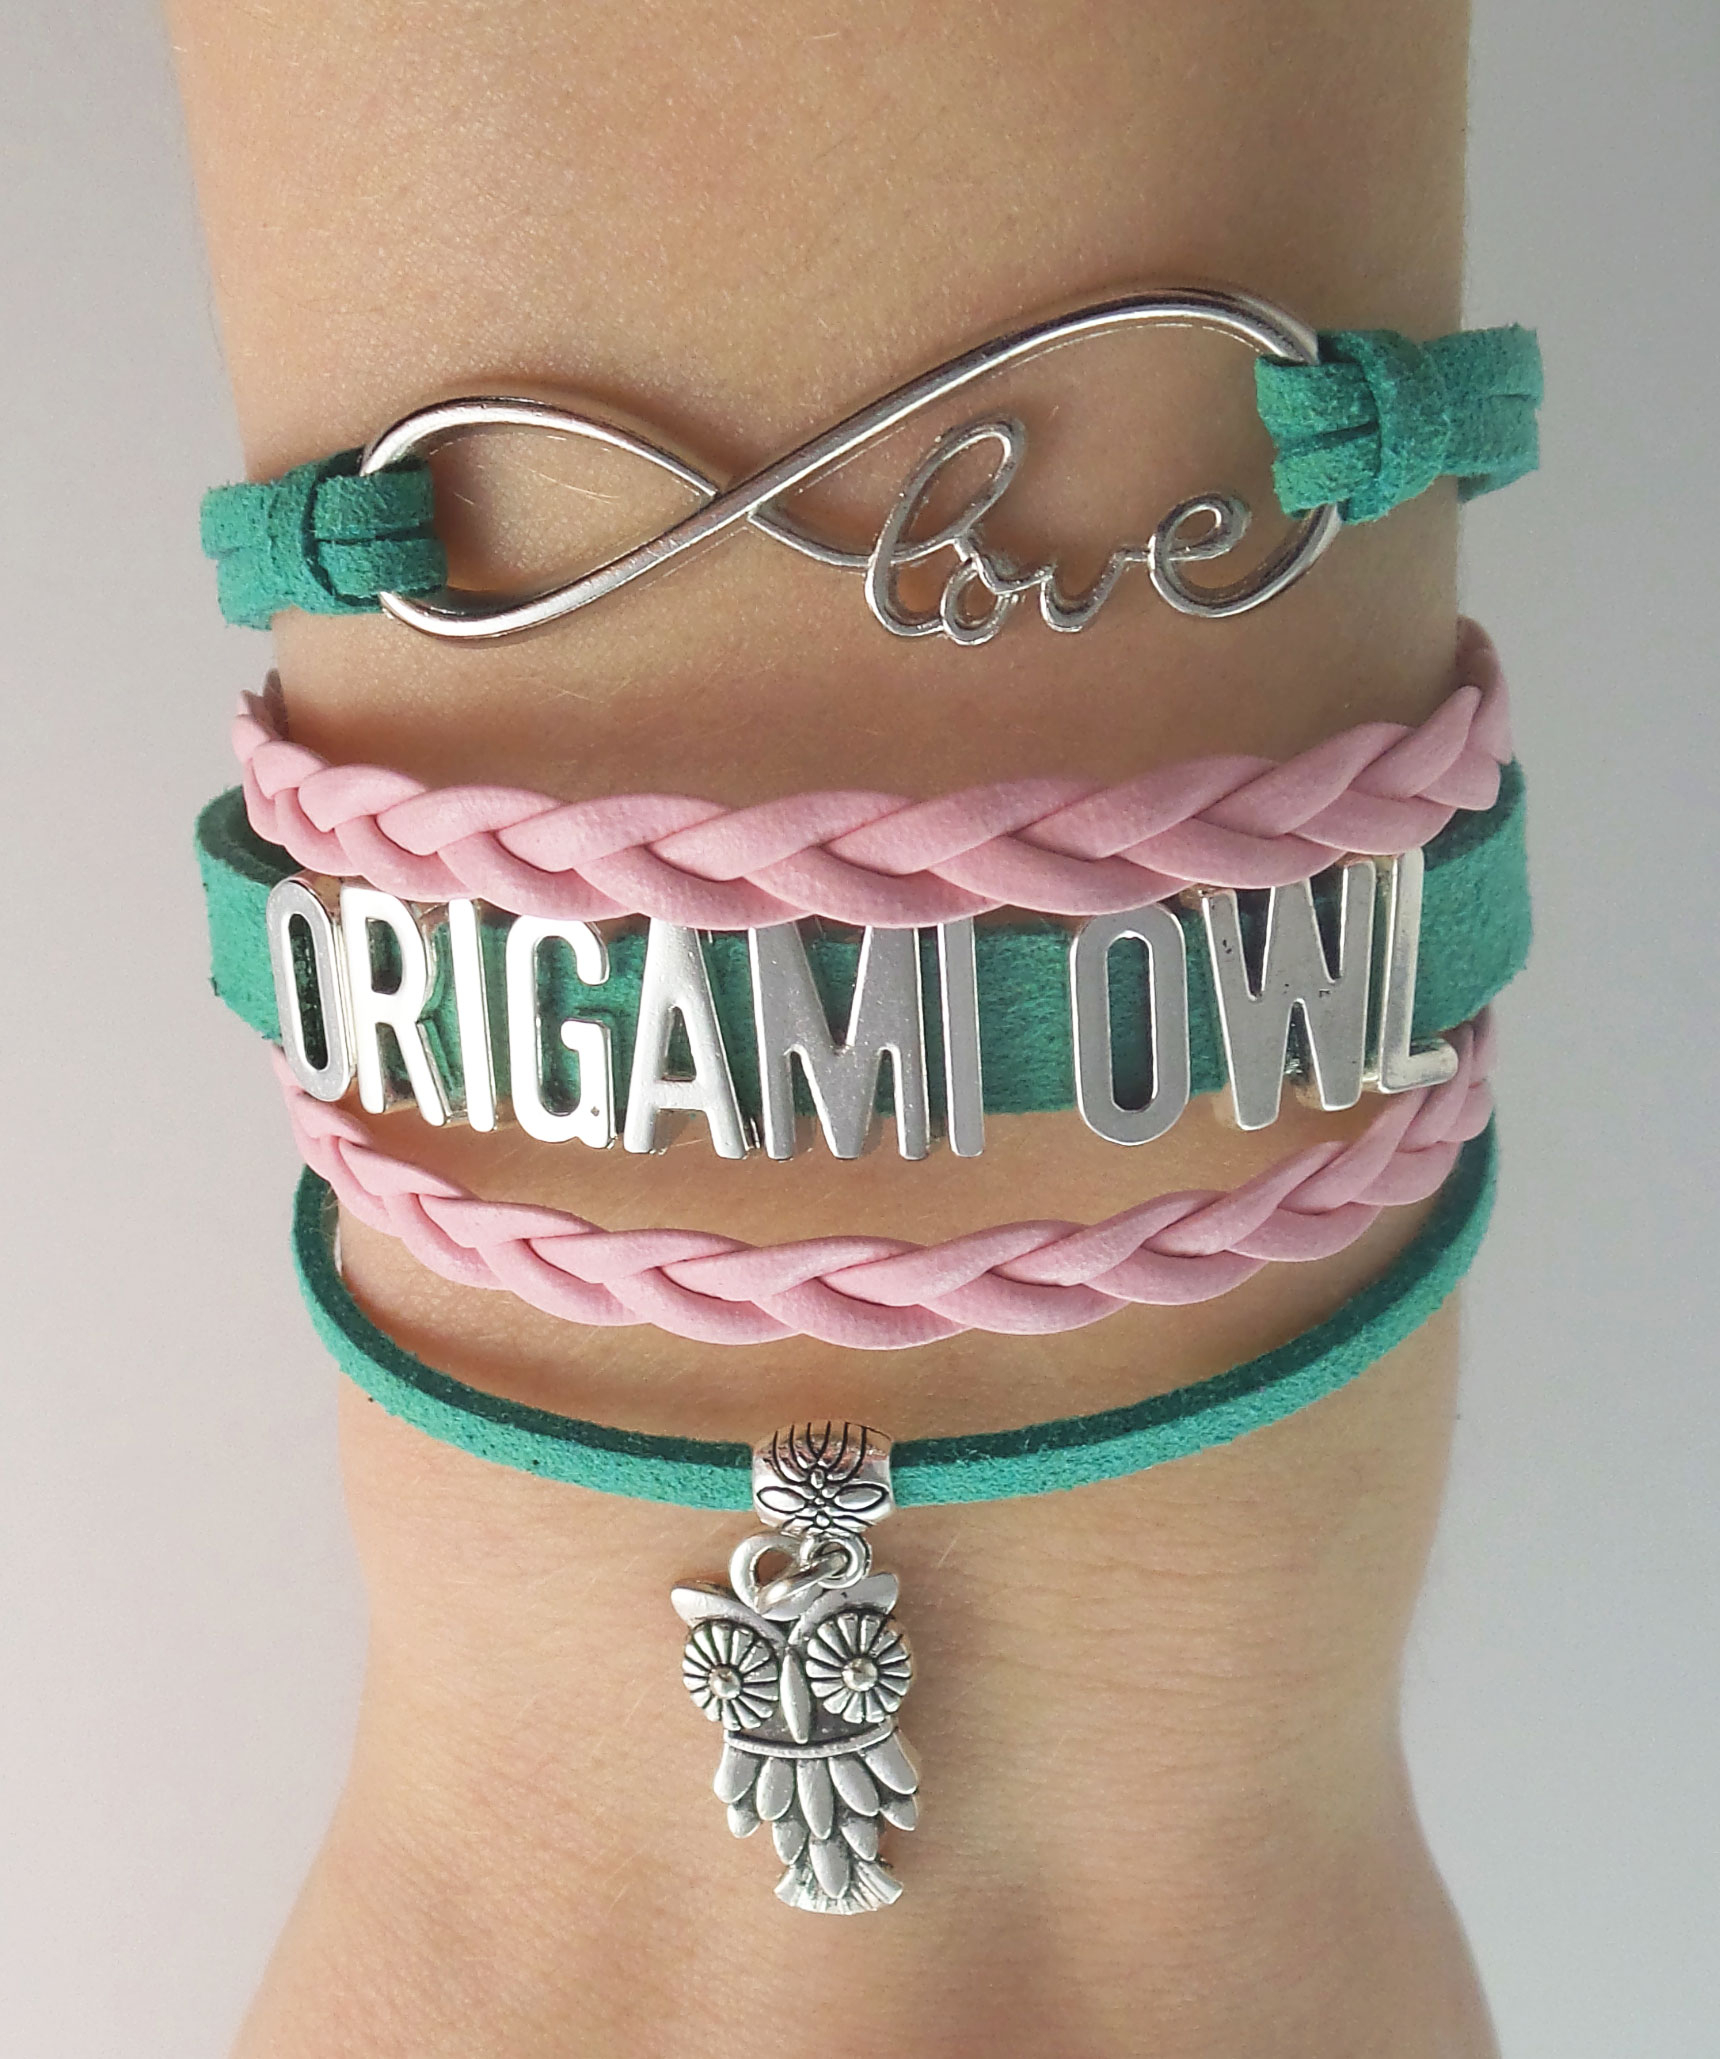 Where To Buy Origami Owl Origami Owl Bracelet Represent Your Brand Mohawk Not Included